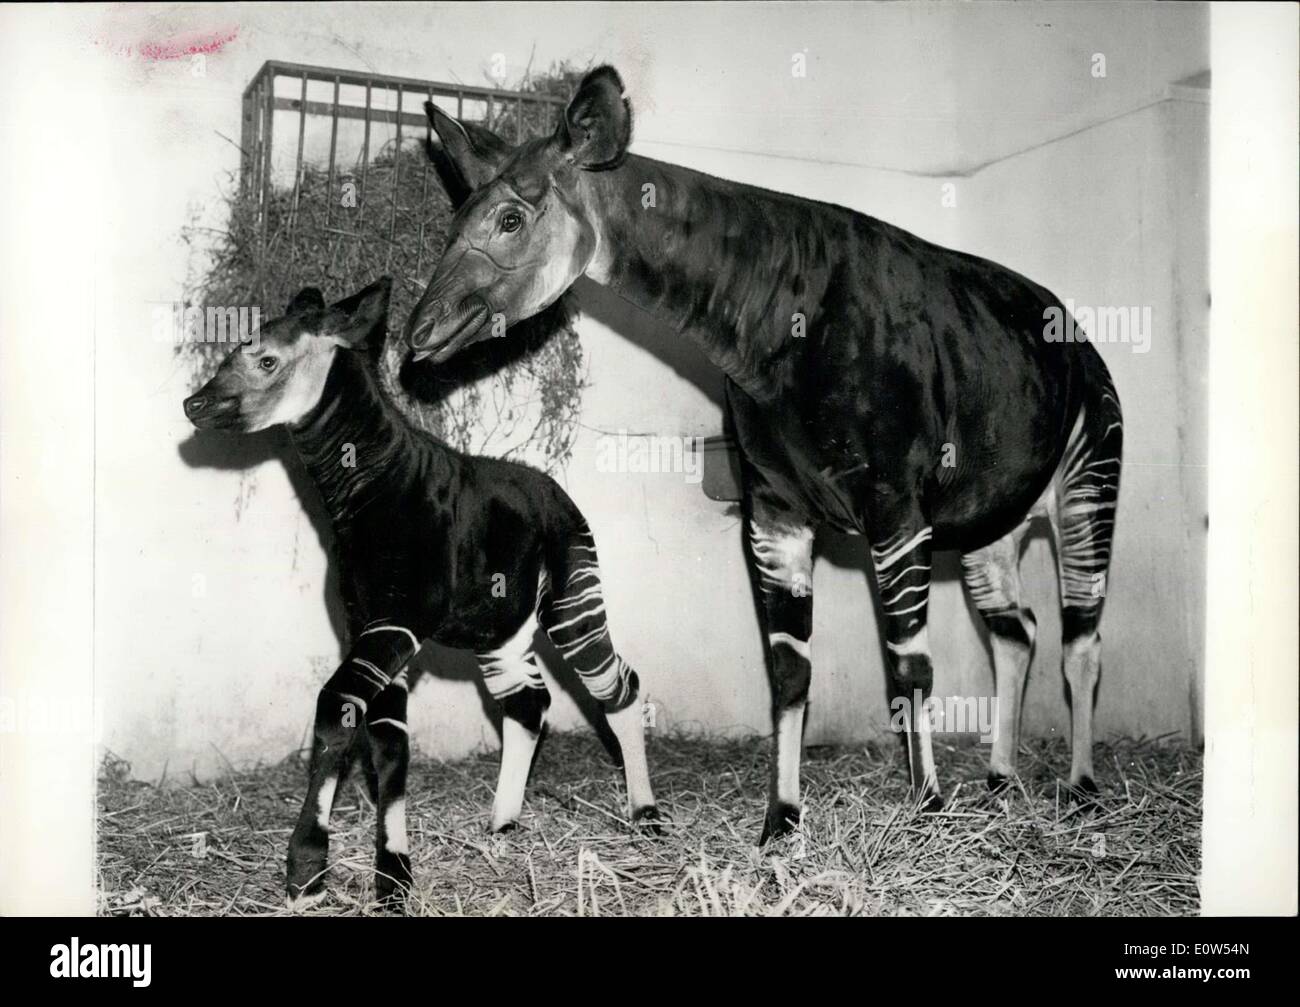 Jun. 08, 1961 - Born in Paris zoo. Photo shows Baby Okapi (a crossing of Antelope and Giraffe) born in the Paris zoo pictured with its mother this morning. Stock Photo